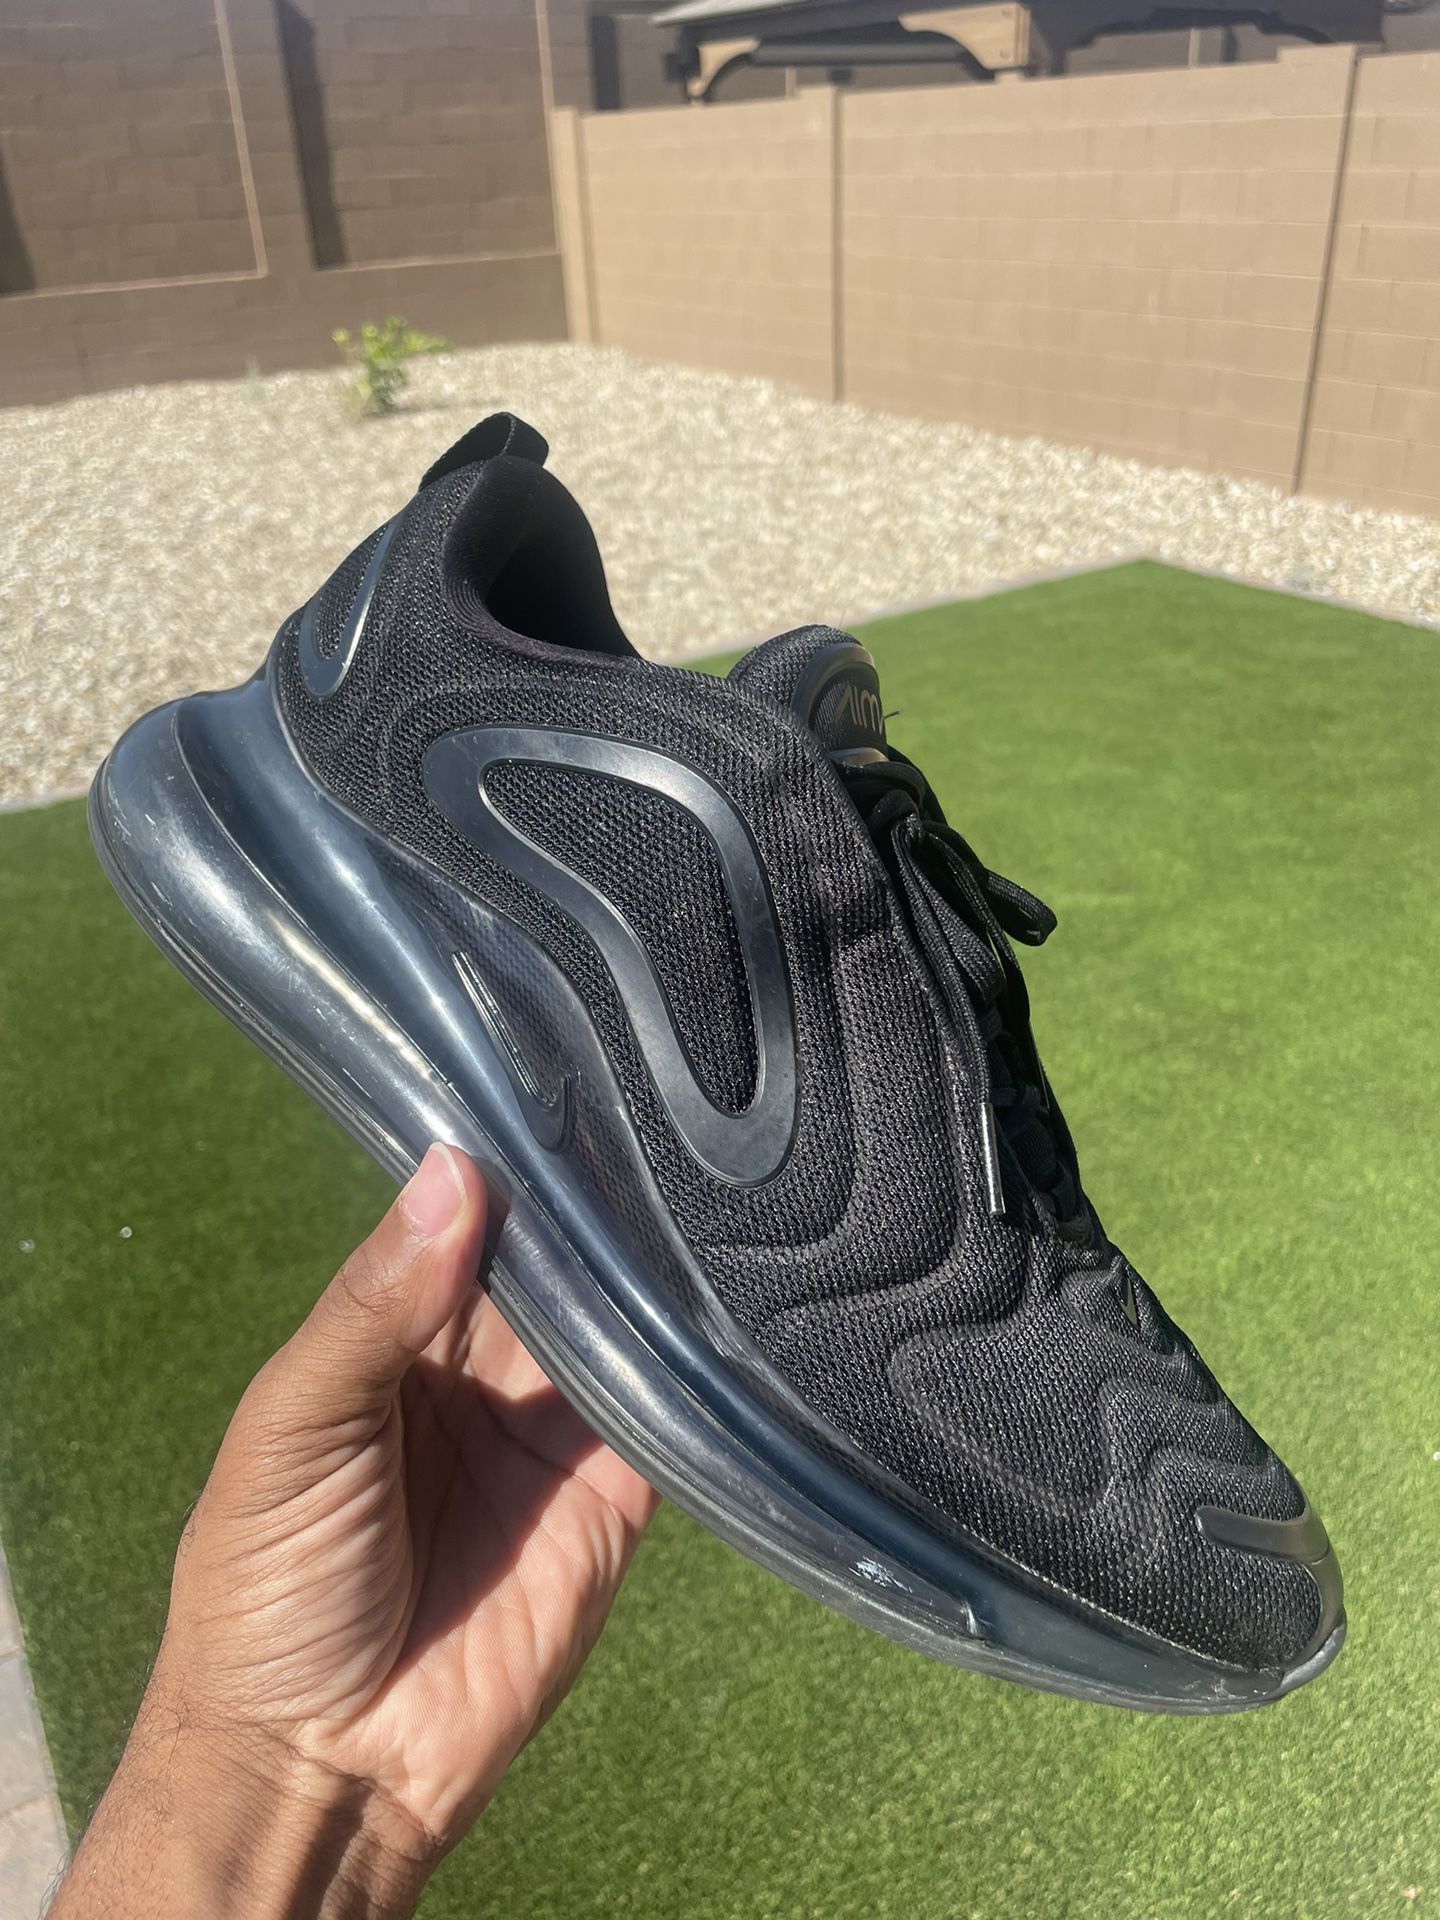 rivier Twisted Verrast Nike Air Max 720 'Black Mesh' for Sale in Goodyear, AZ - OfferUp